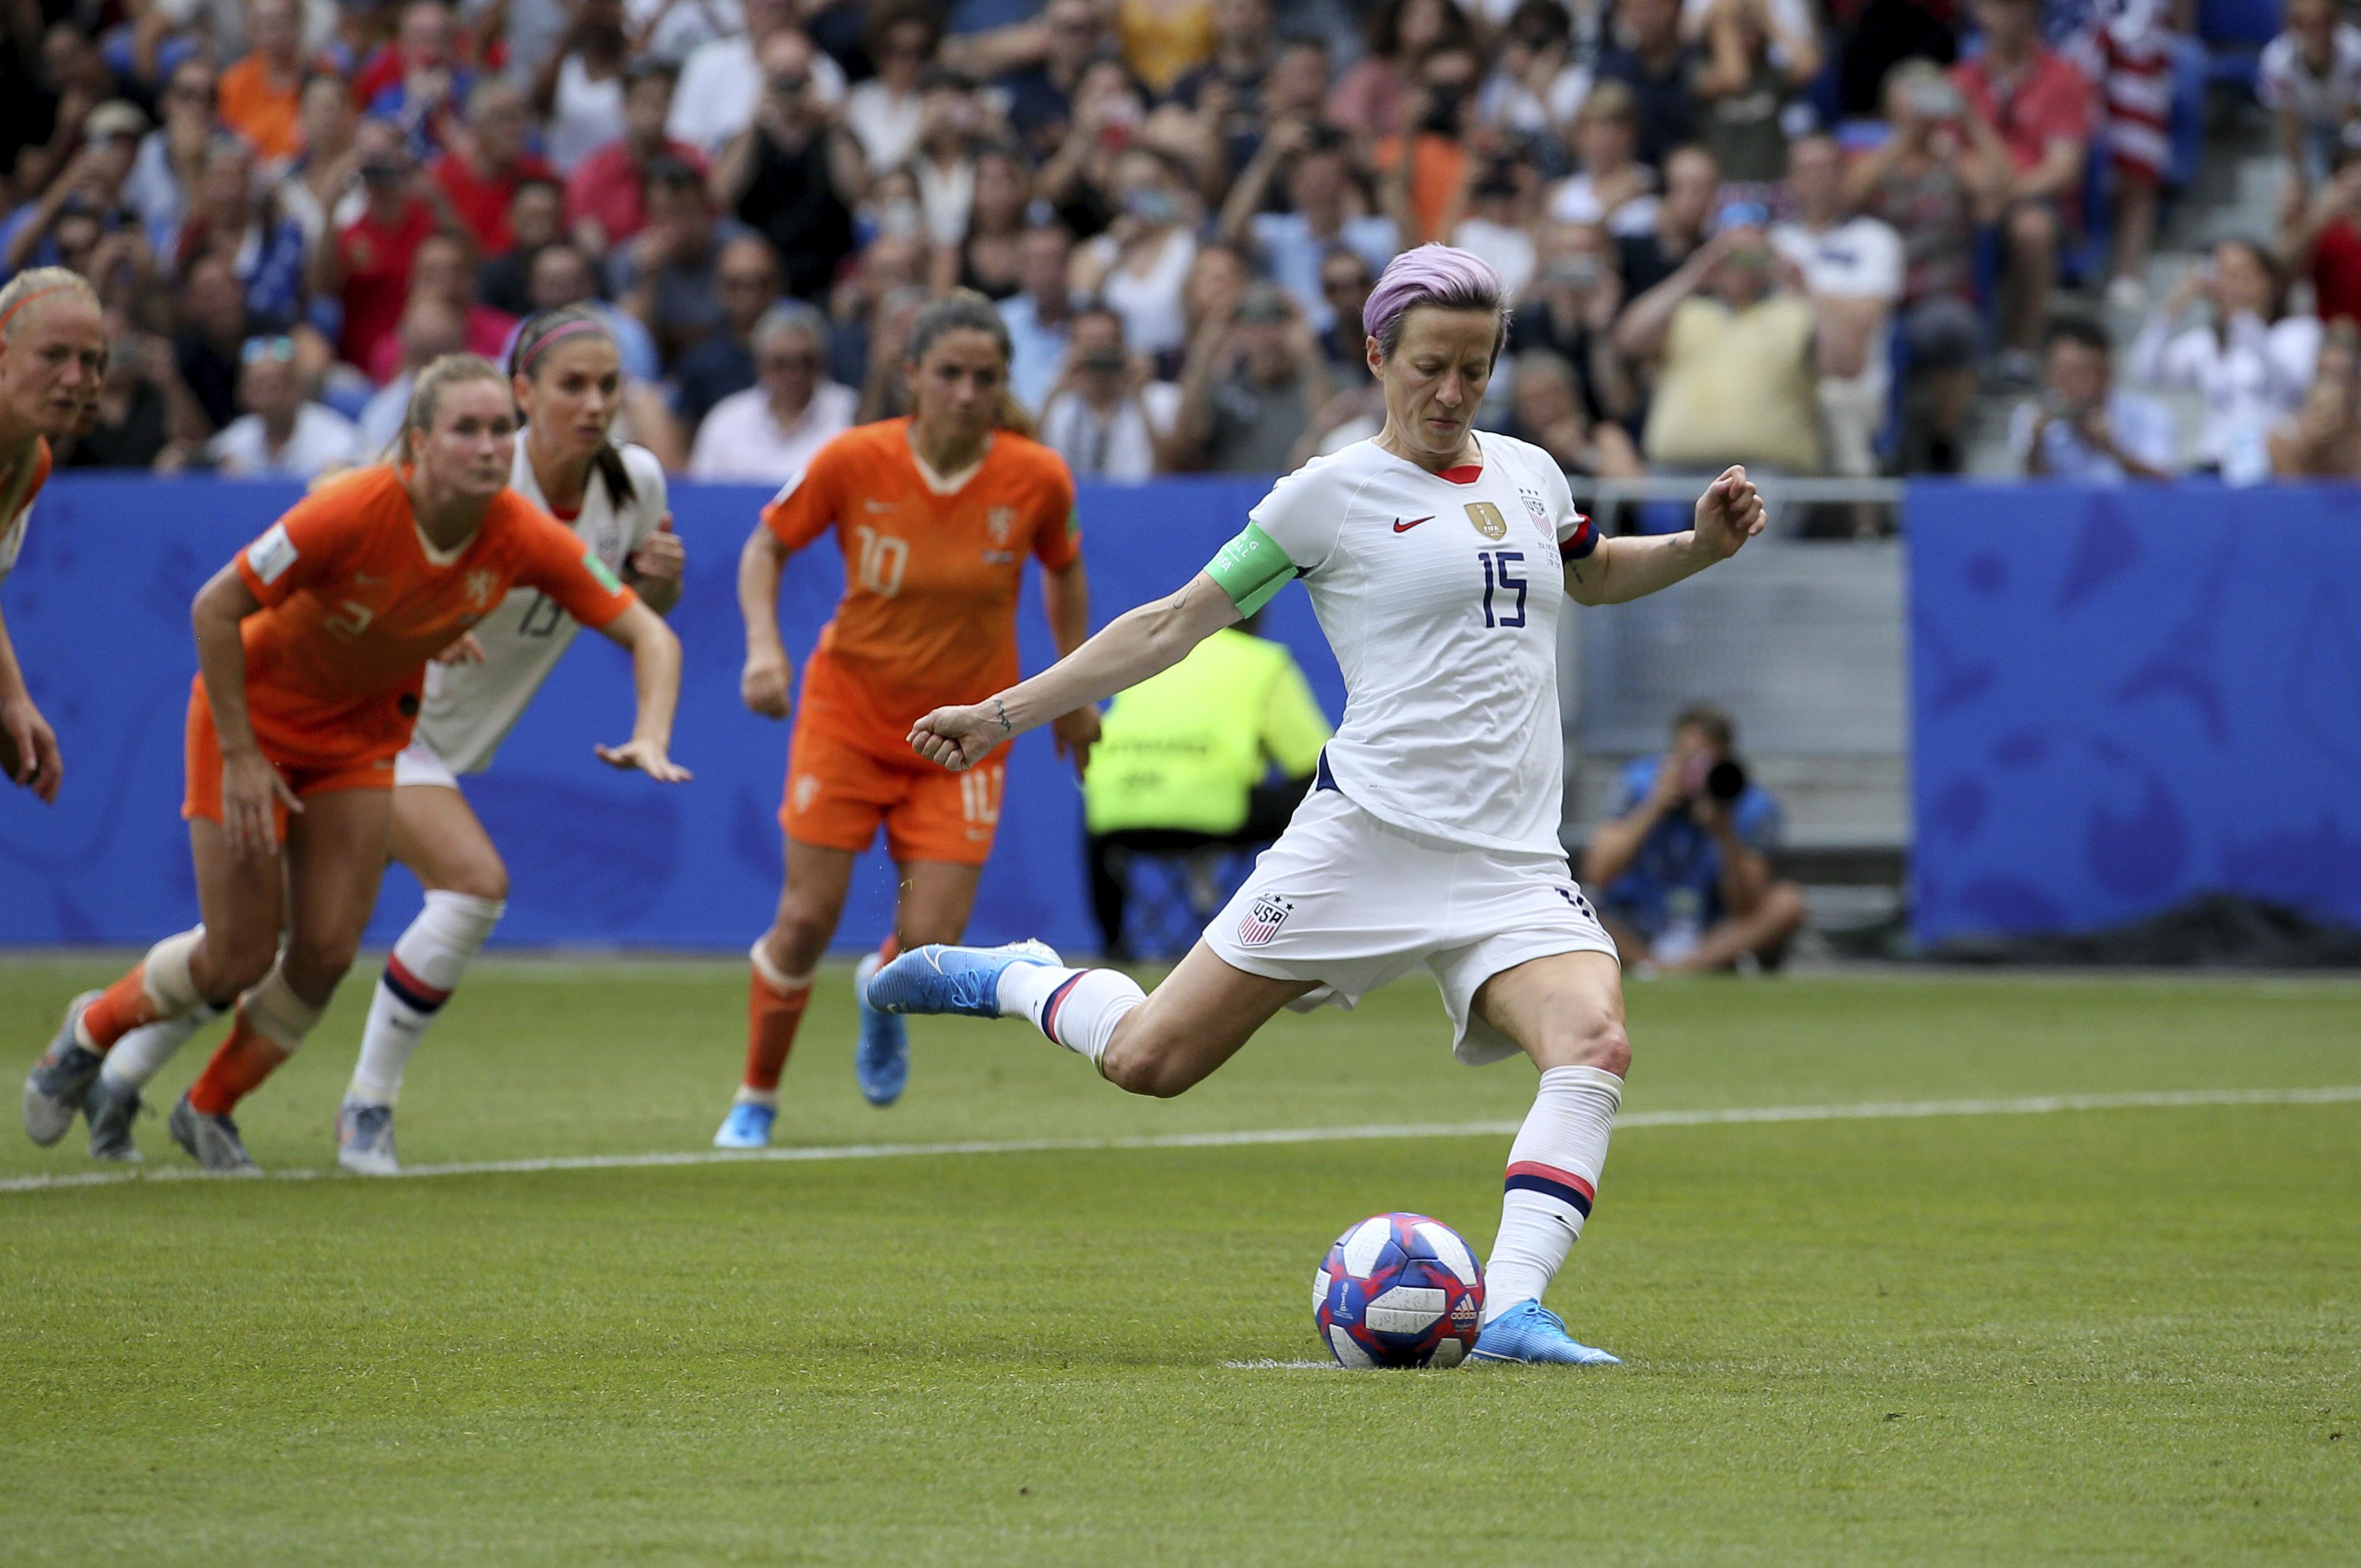 A Grip on Sports The World Cup win for the U.S. women opened a Sunday